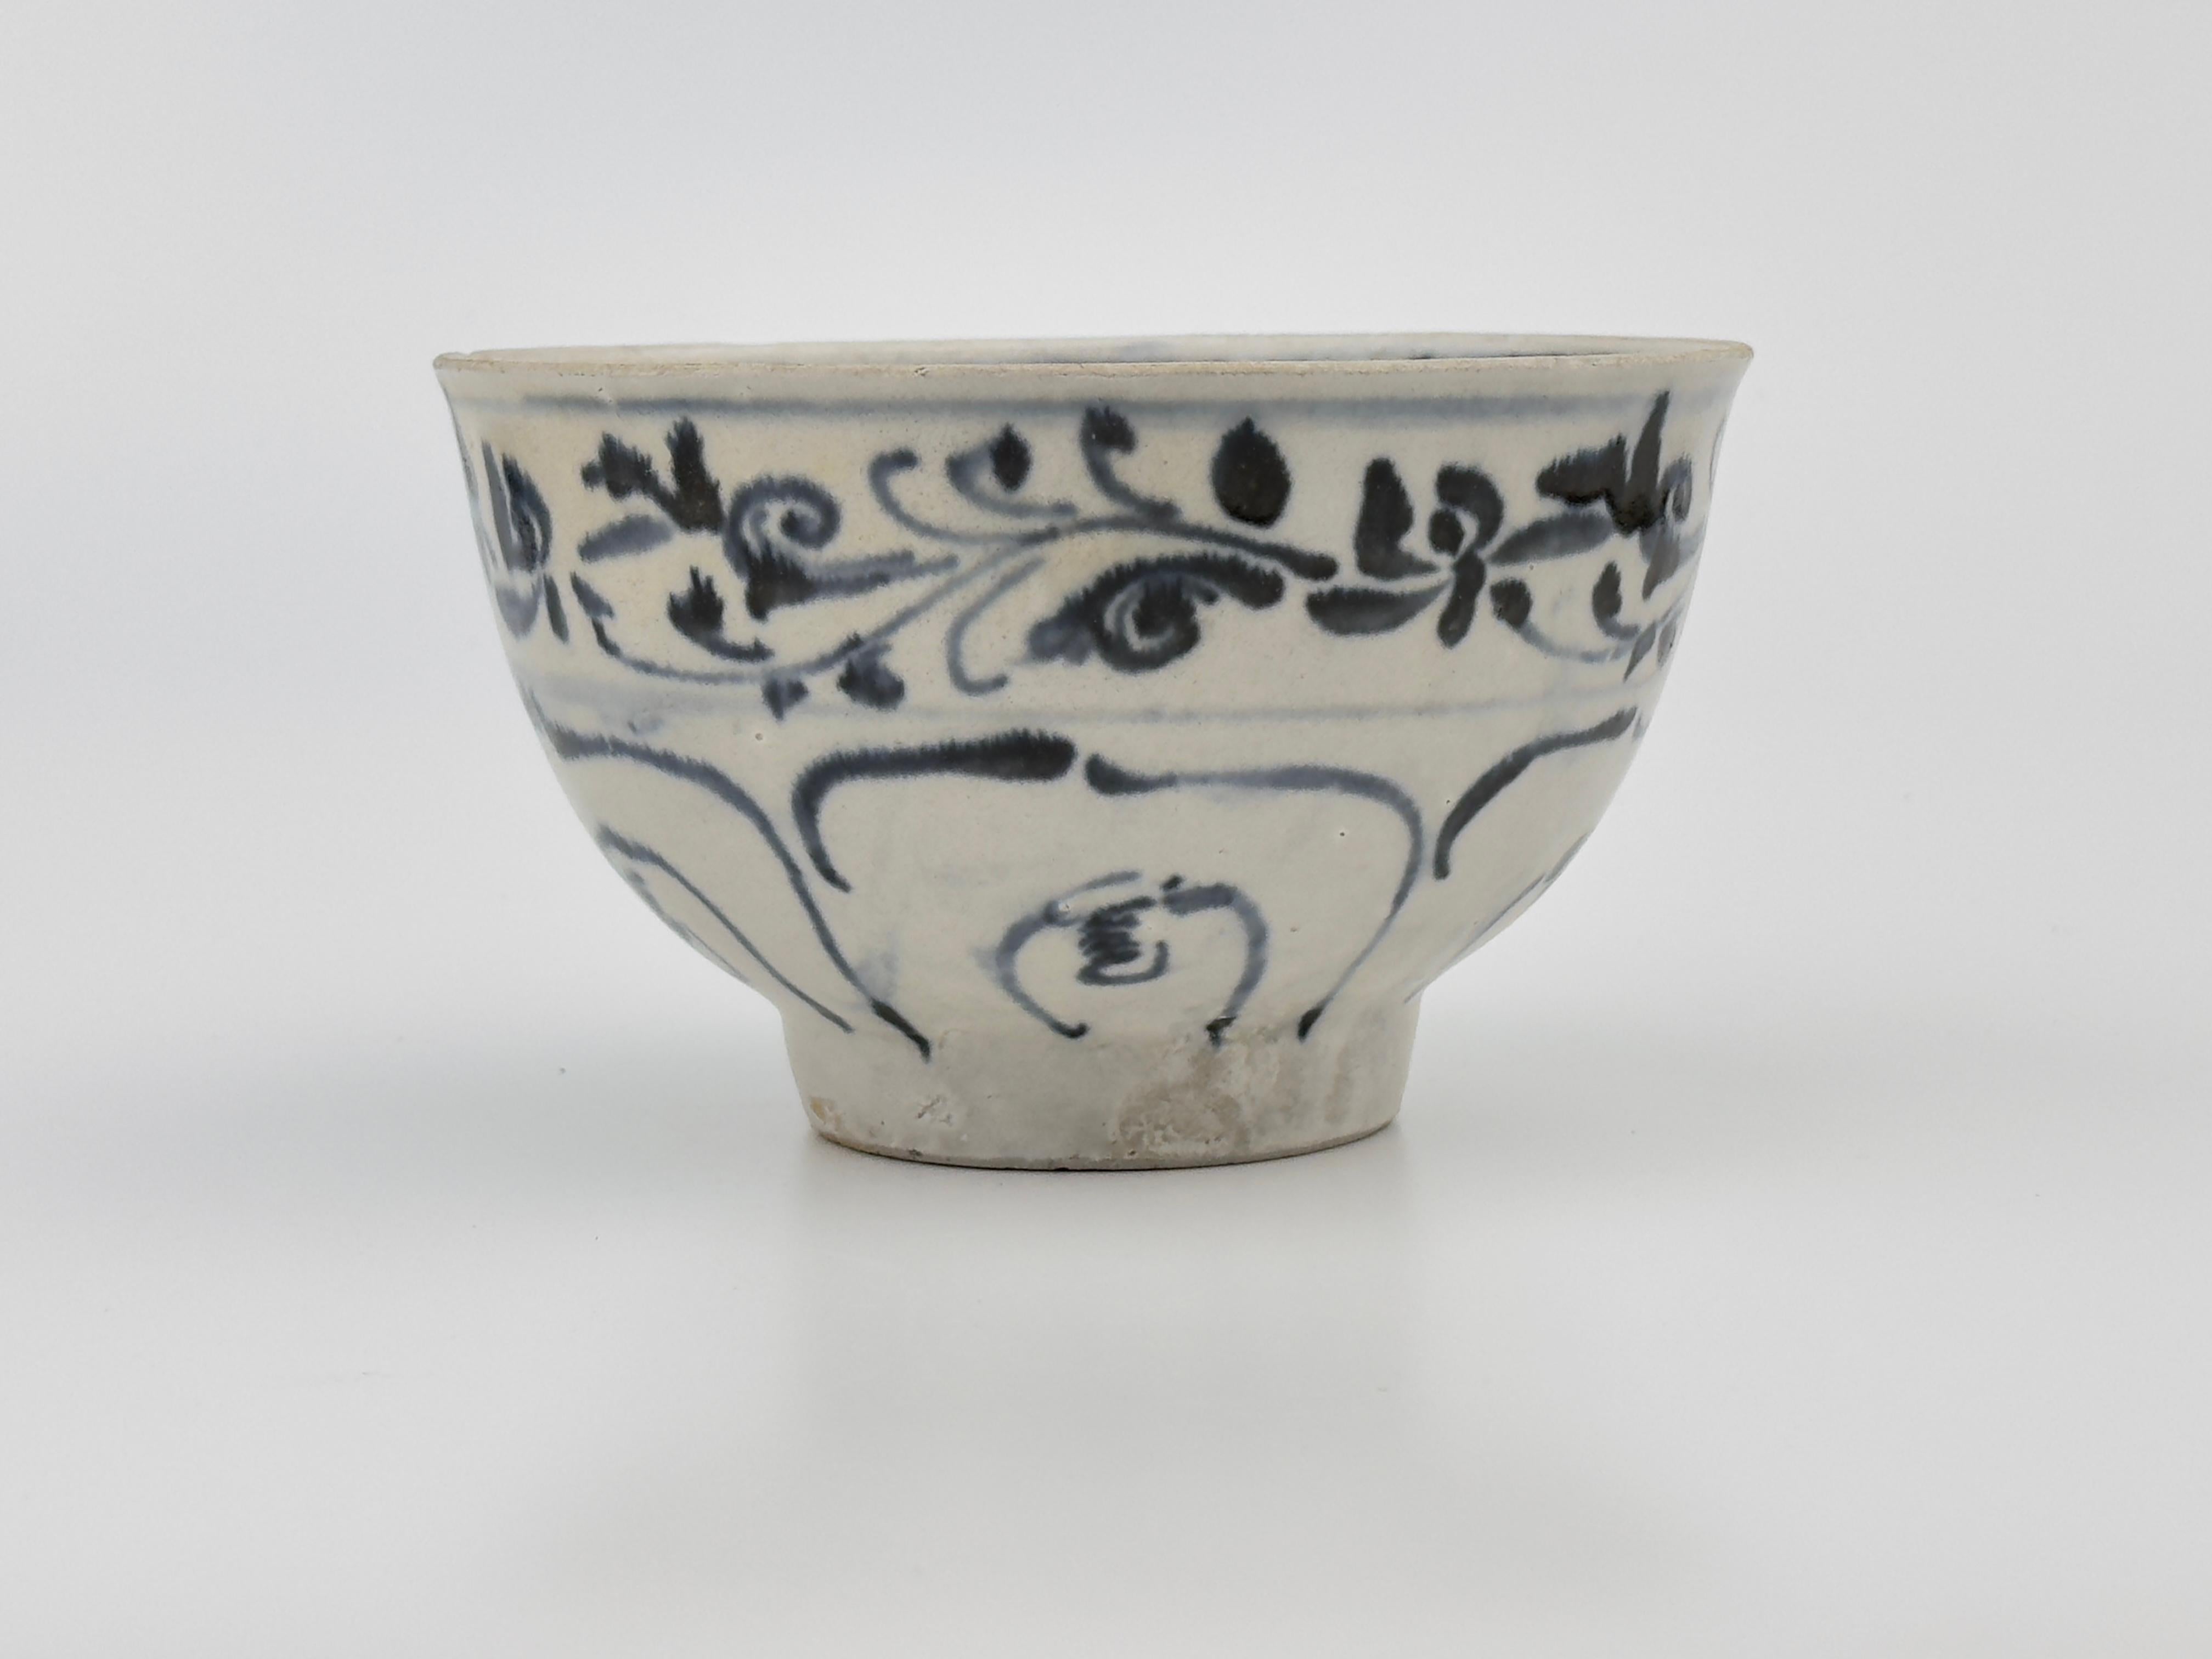 The bowl's design features fluid, dynamic brushstrokes typical of Annamese pottery, where cobalt blue underglaze was used to create intricate patterns before a clear glaze was applied. The artwork, with its foliage and floral motifs, suggests a